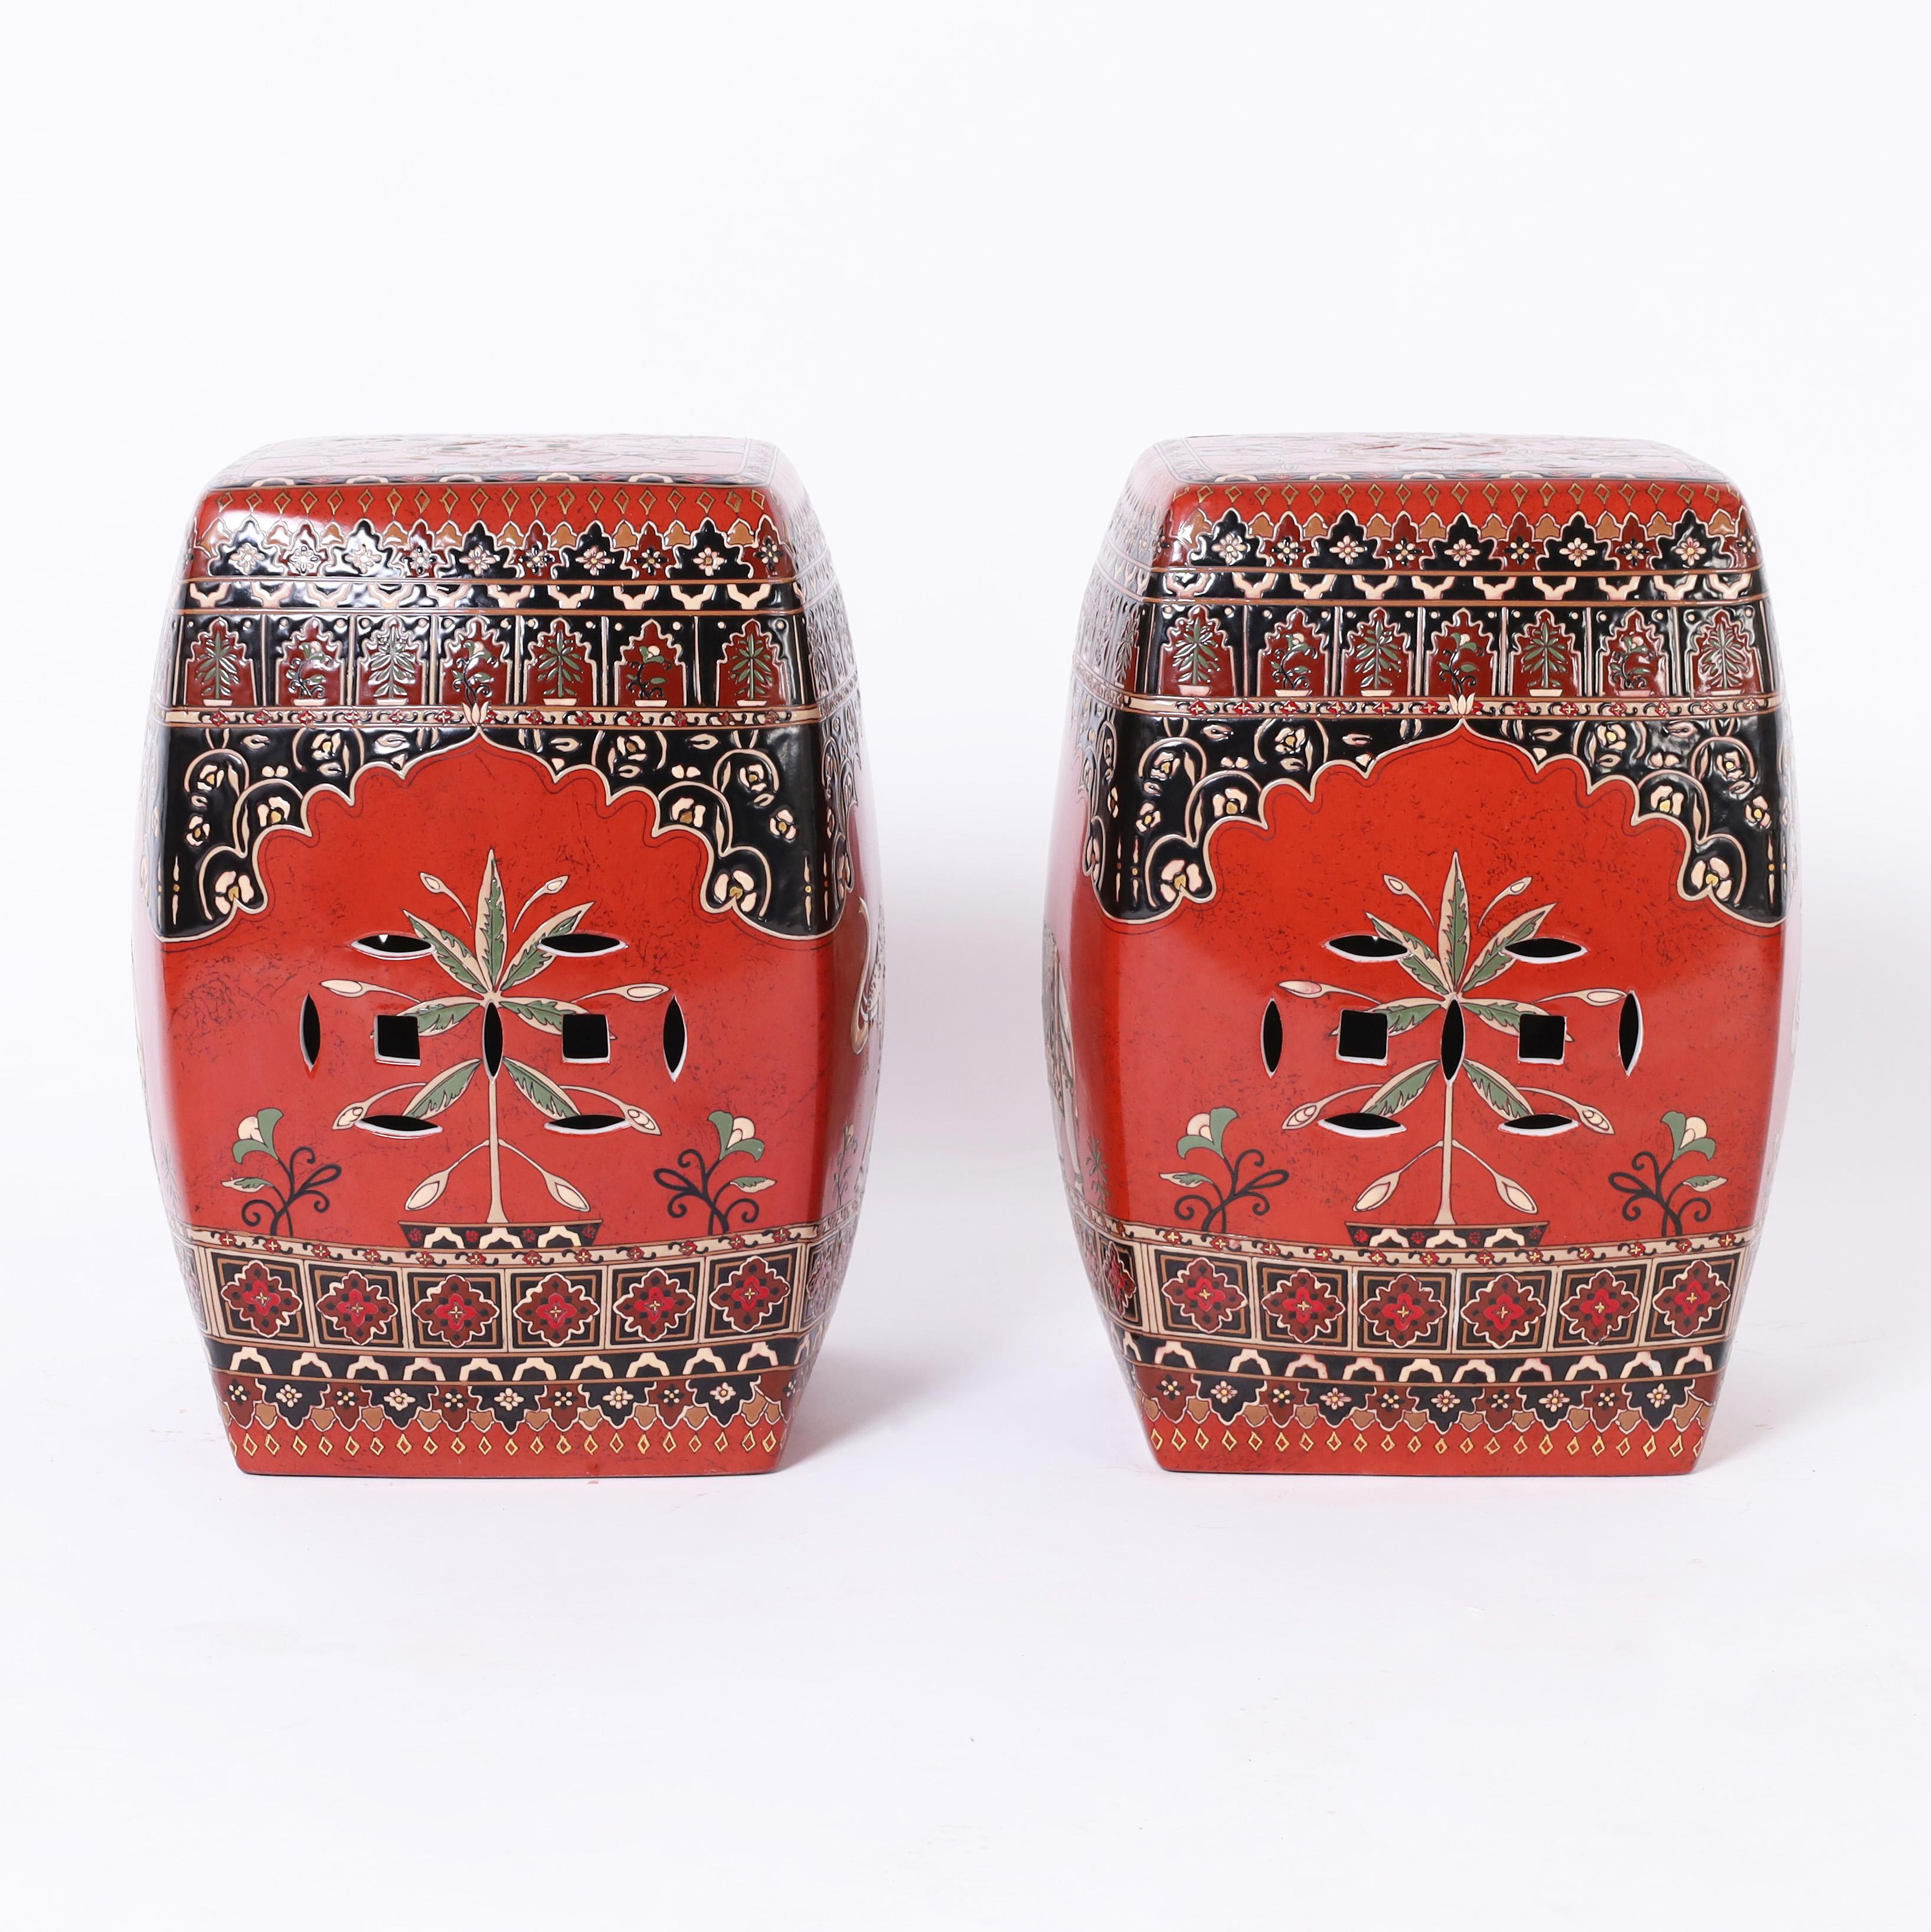 Striking pair of vintage Chinese garden seats with rare decorative appeal hand decorated with elephants on an alluring red background and floral and geometric borders. 